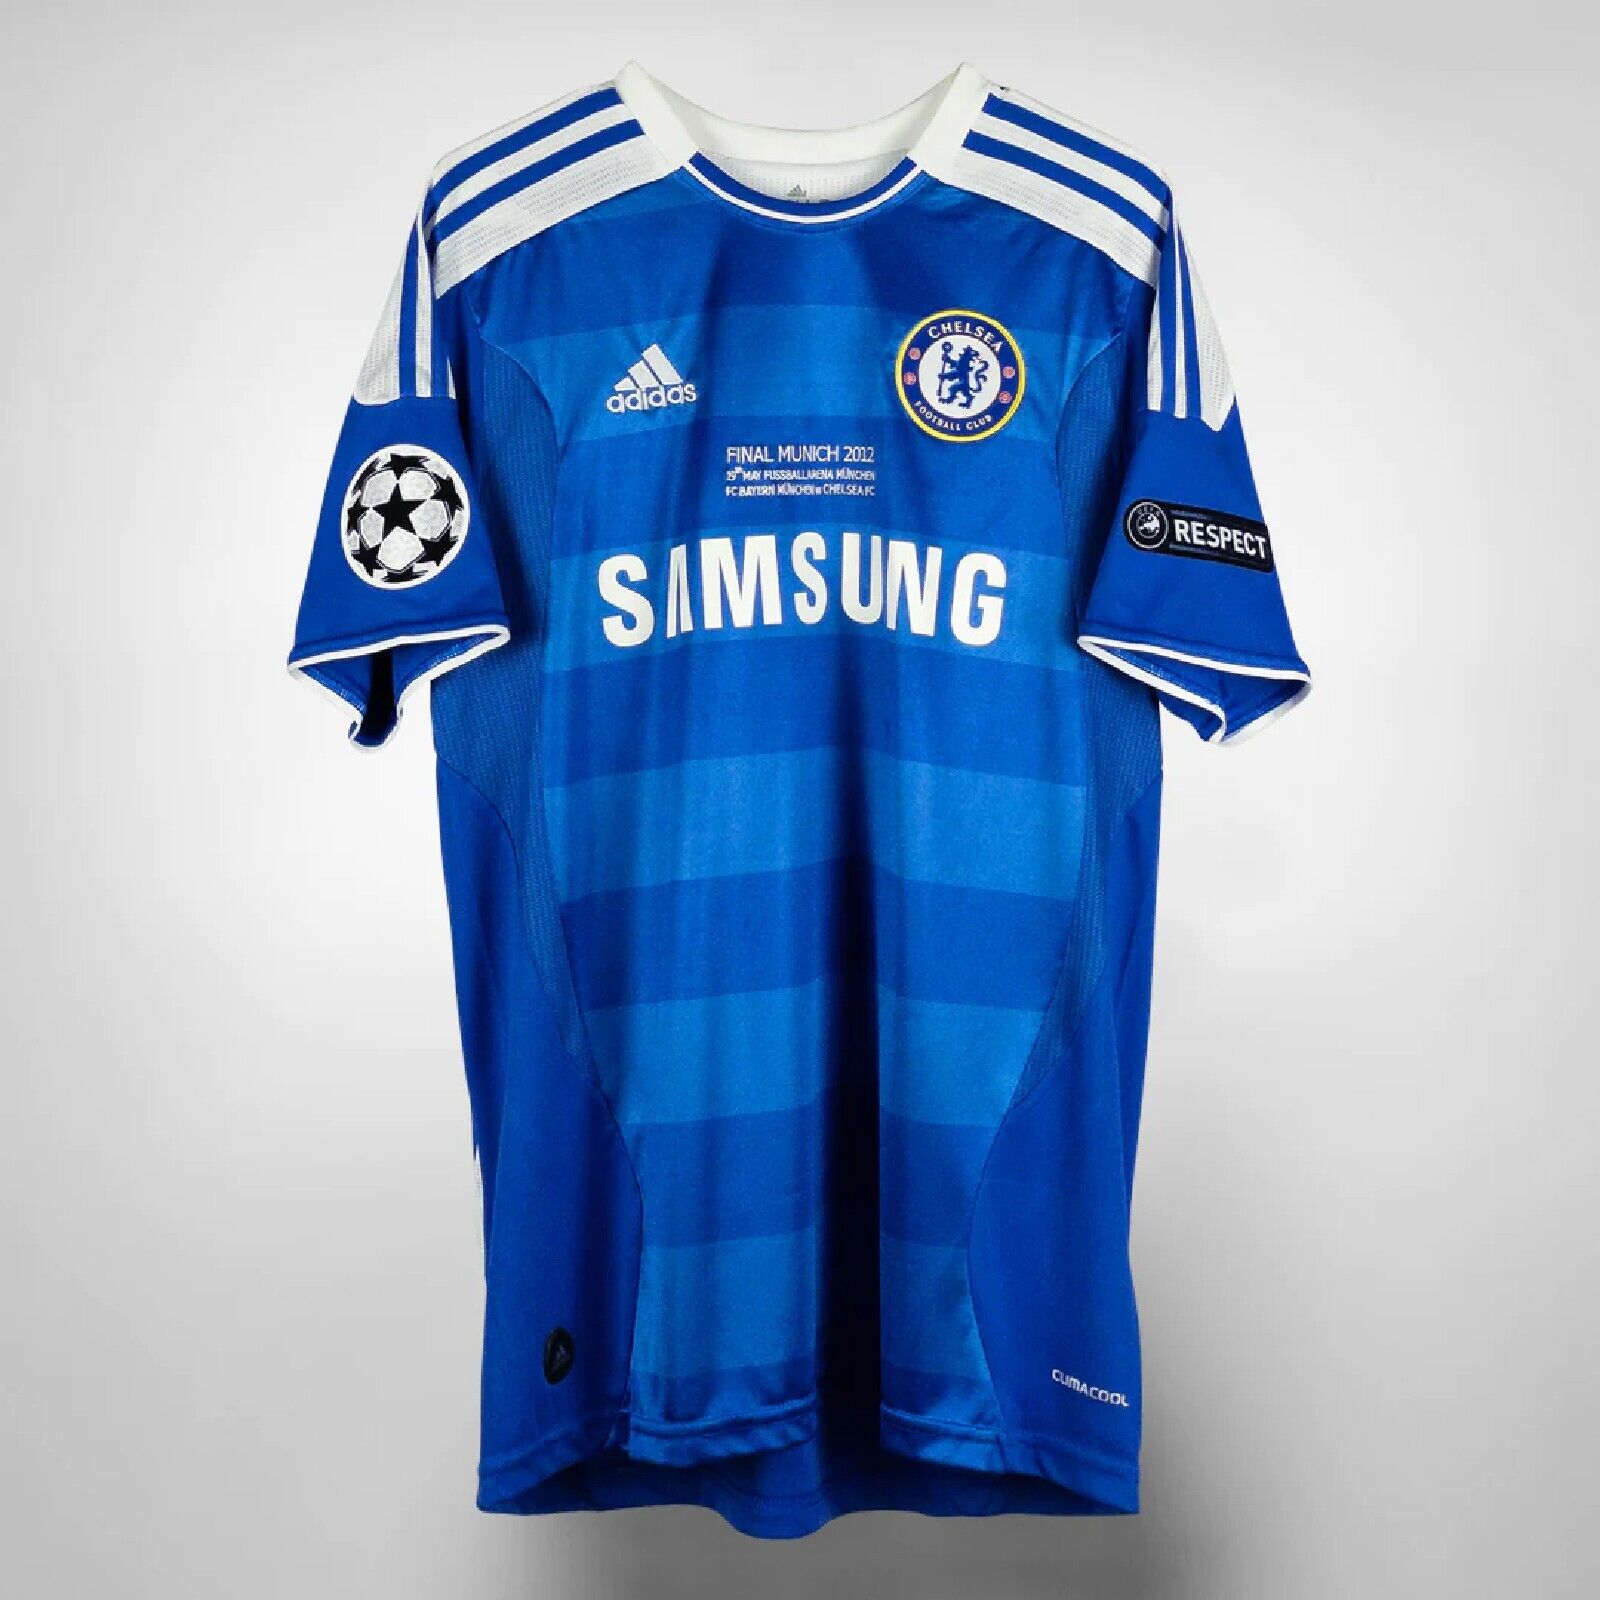 Chelsea 2011/2012 Retro Home Jersey UCL Final, Lampard #8